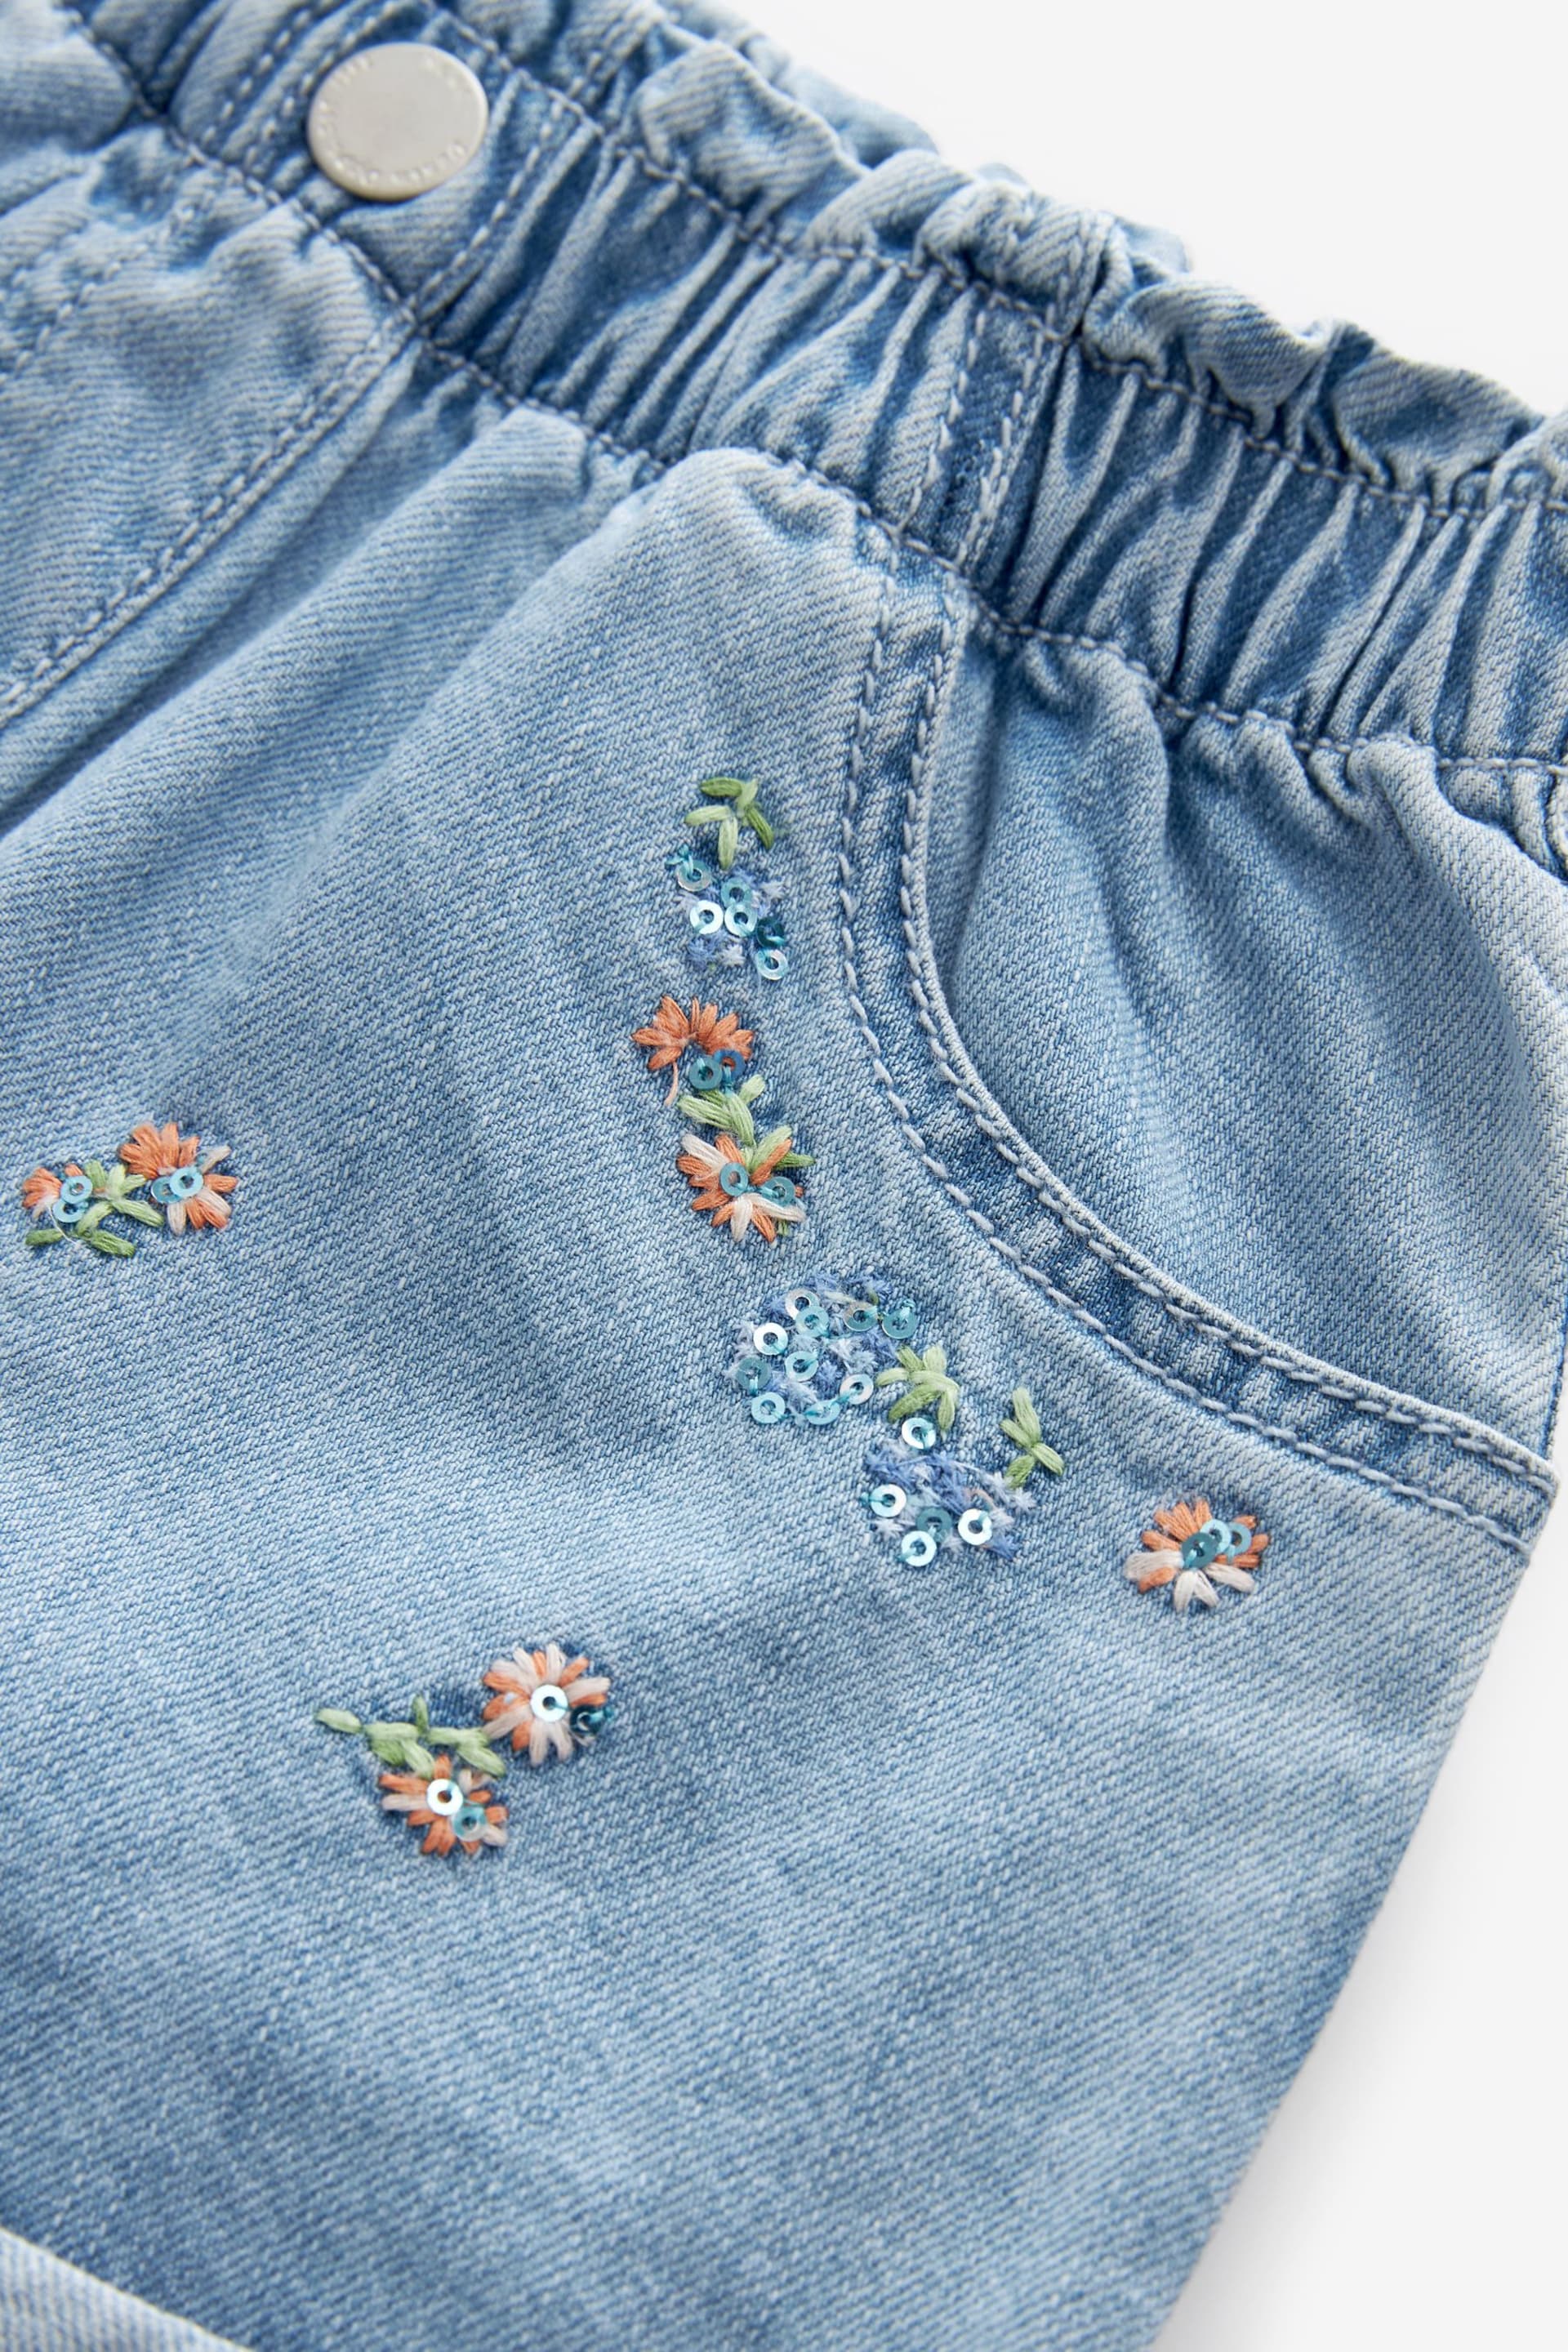 Denim Floral Embroidered Shorts (3mths-7yrs) - Image 7 of 7